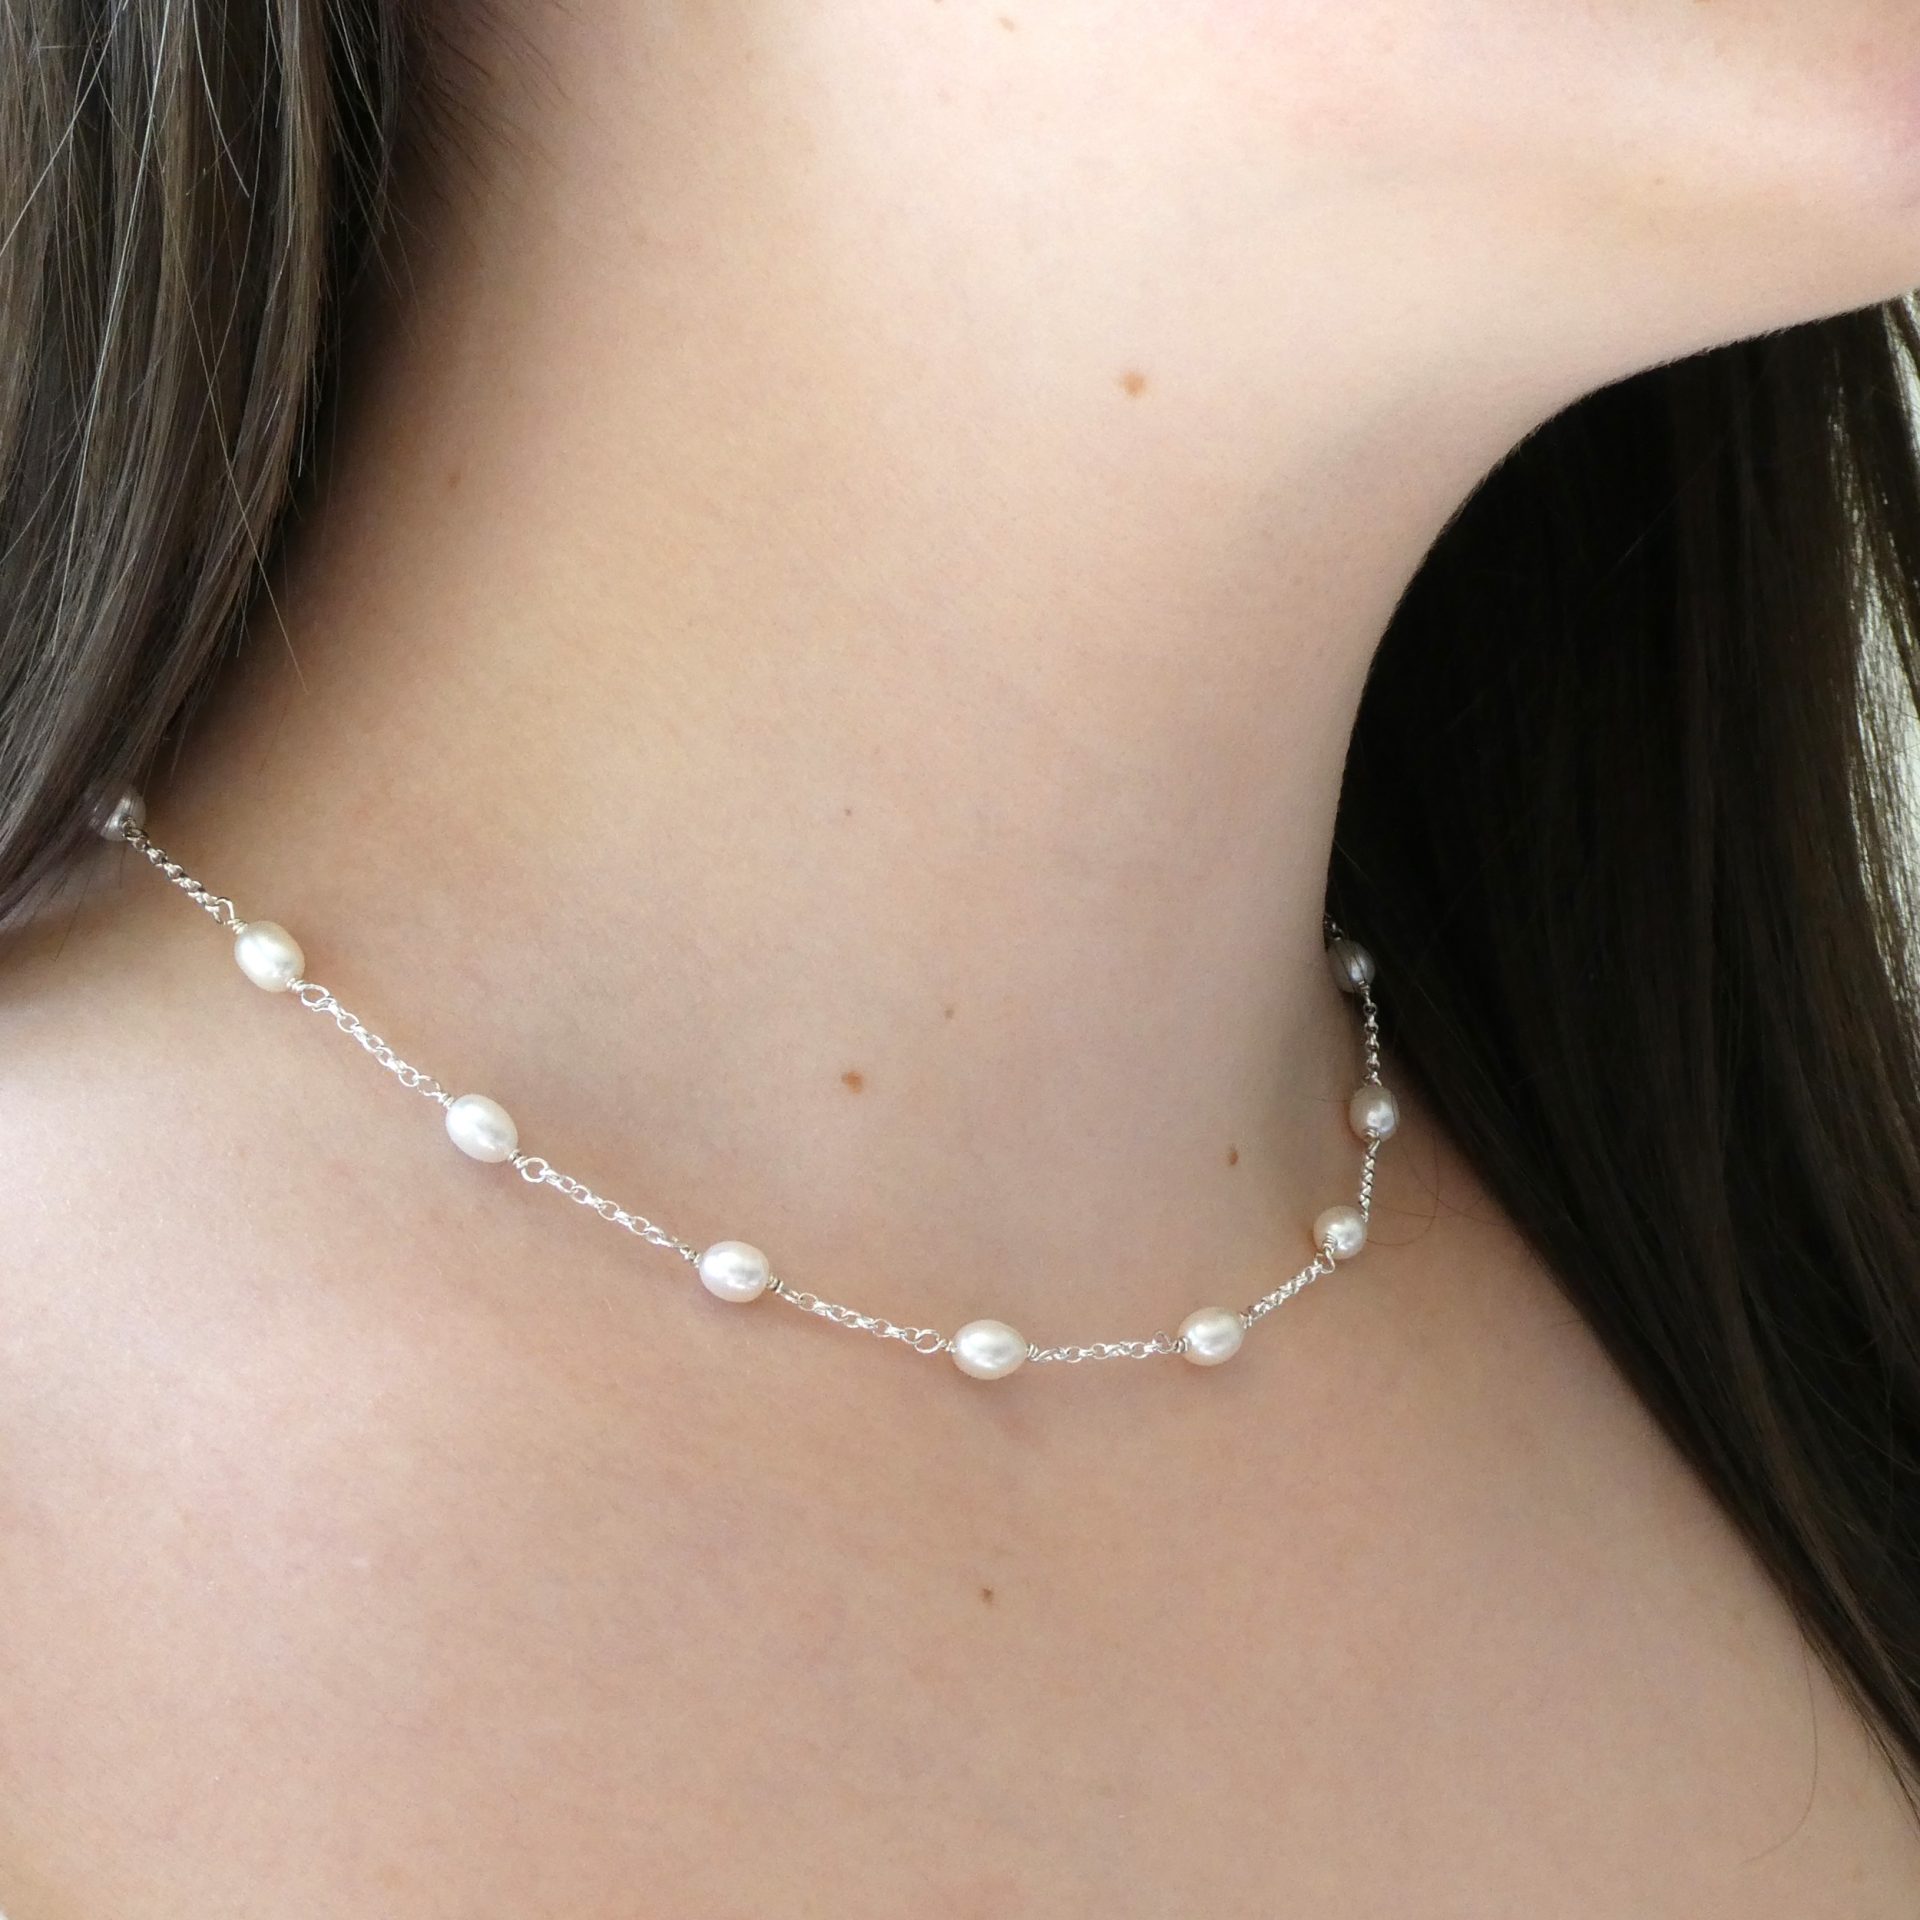 Silver and Pearl Necklace Biba & Rose Freshwater Pearl Jewellery